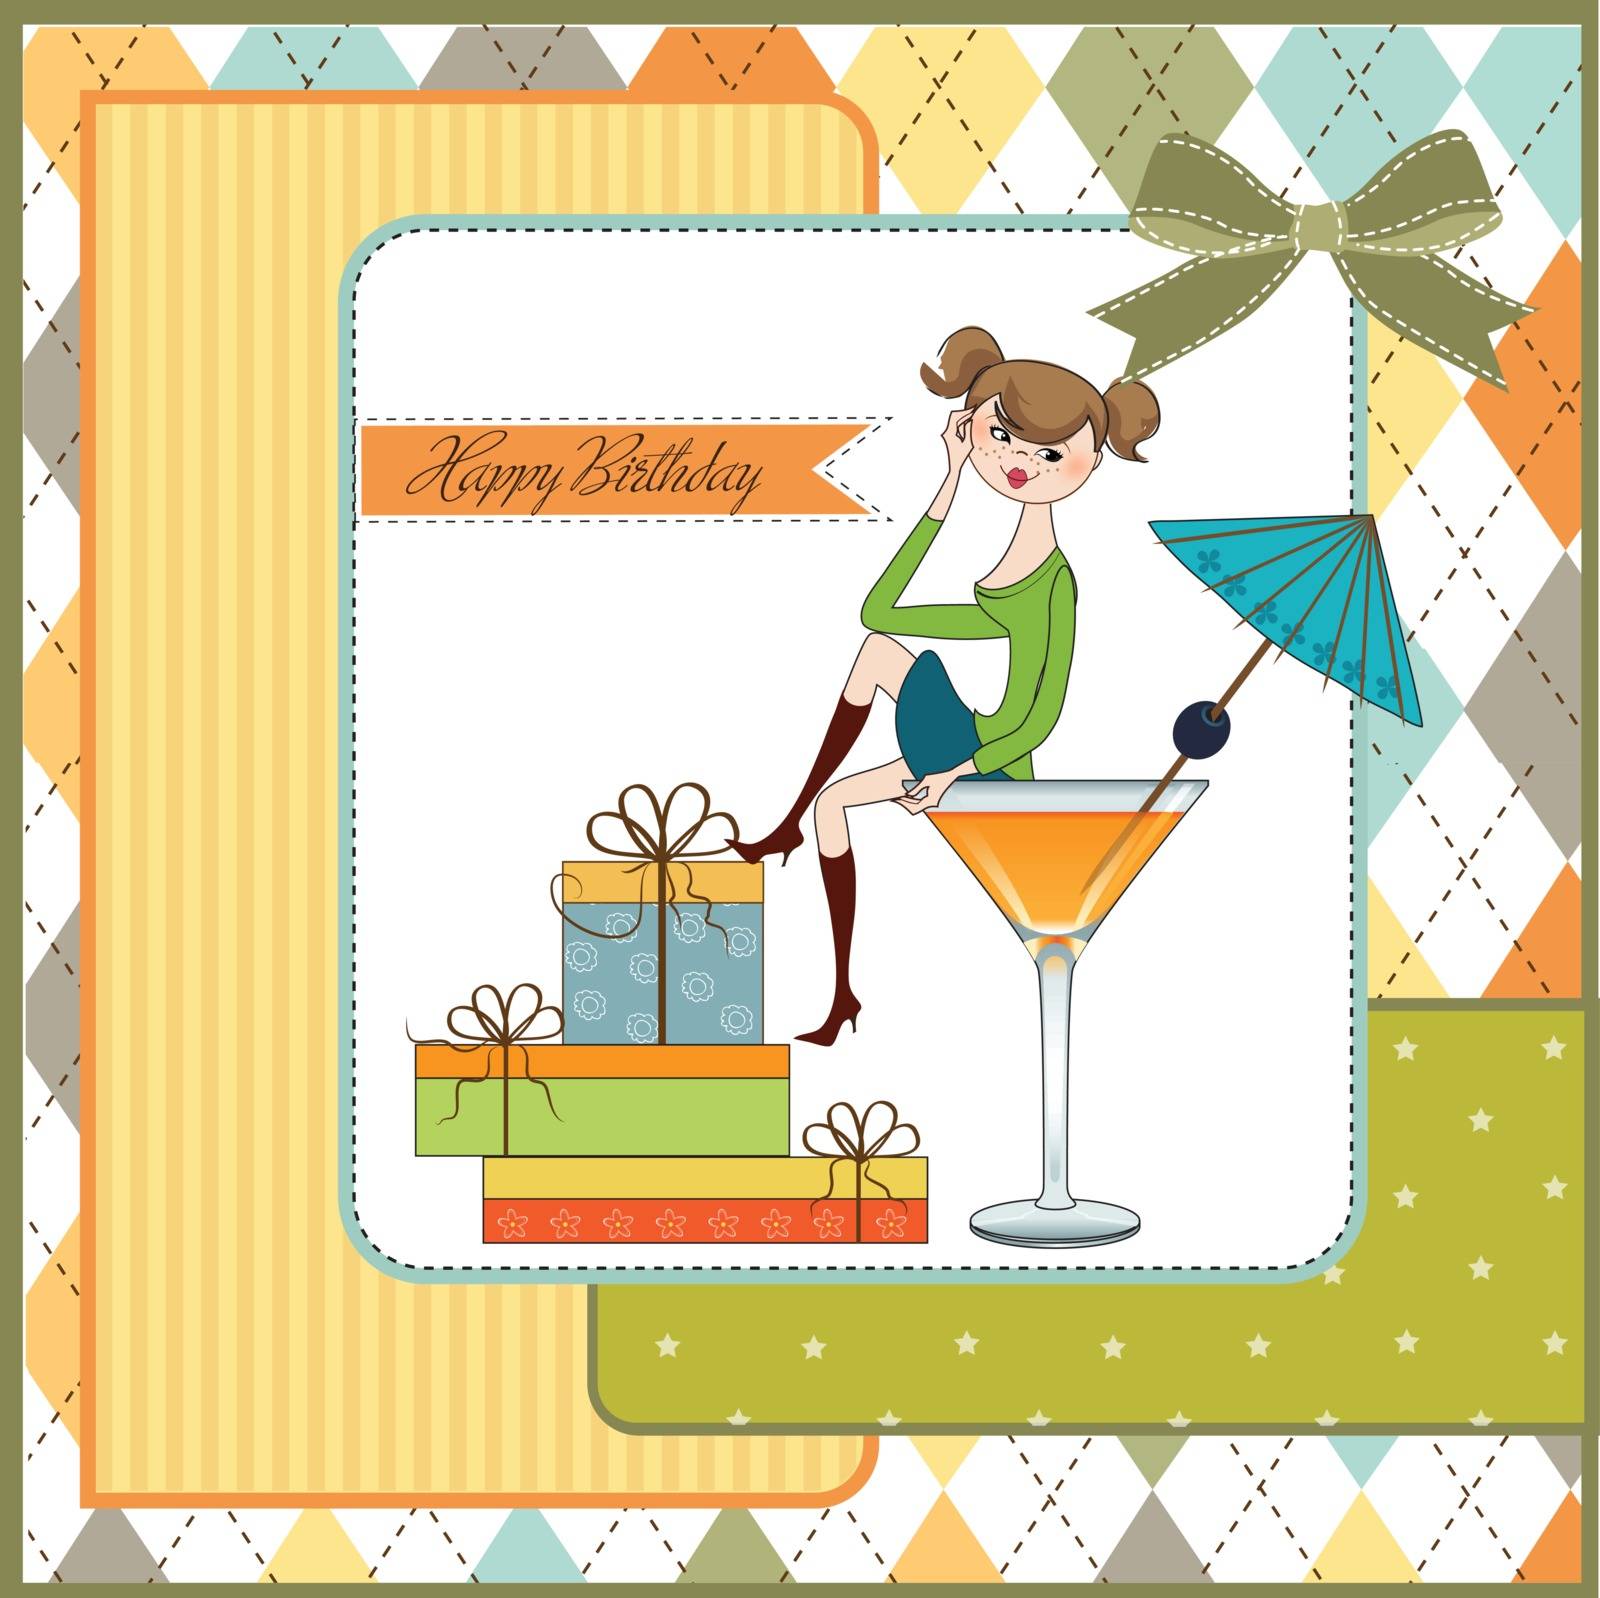 Attractive young girl sitting on the edge of a glass. Glamorous birthday card